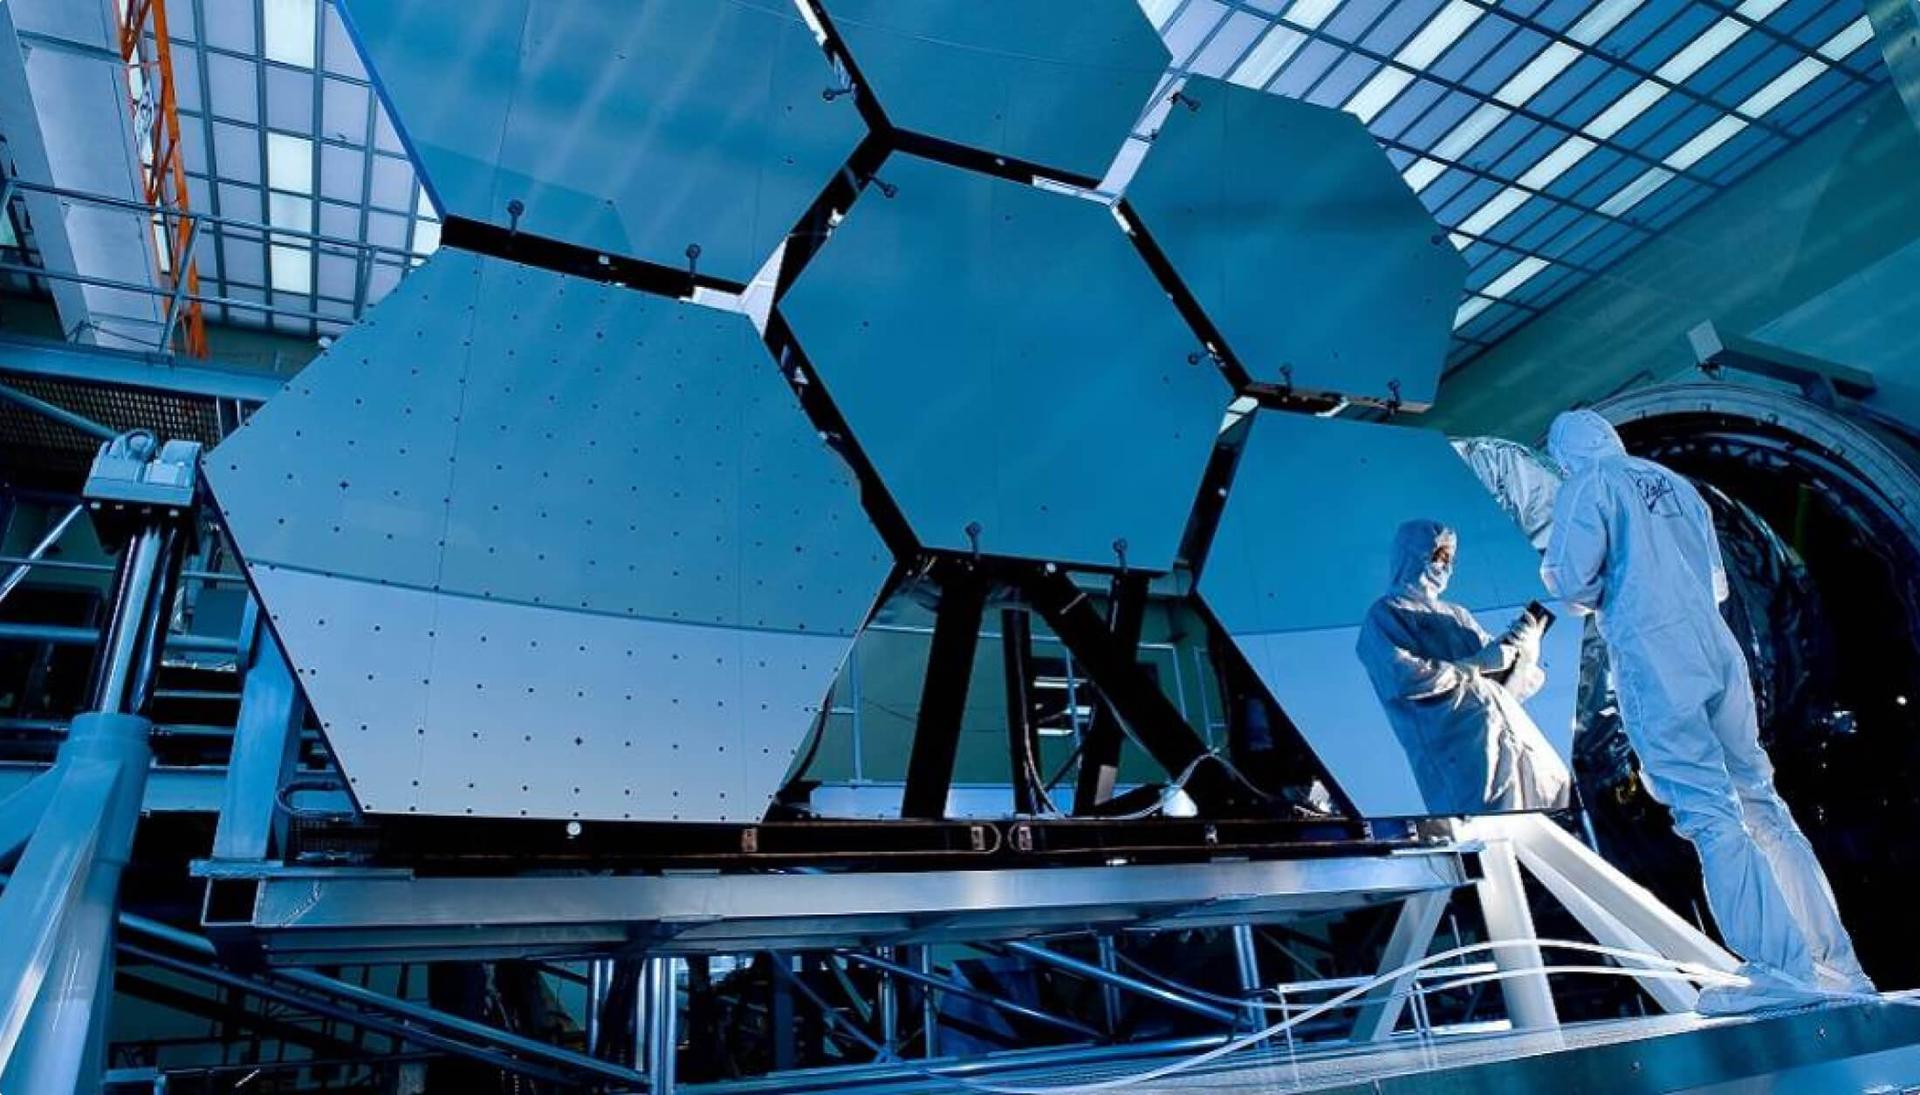 A scientist inspects a group of large industrial panels